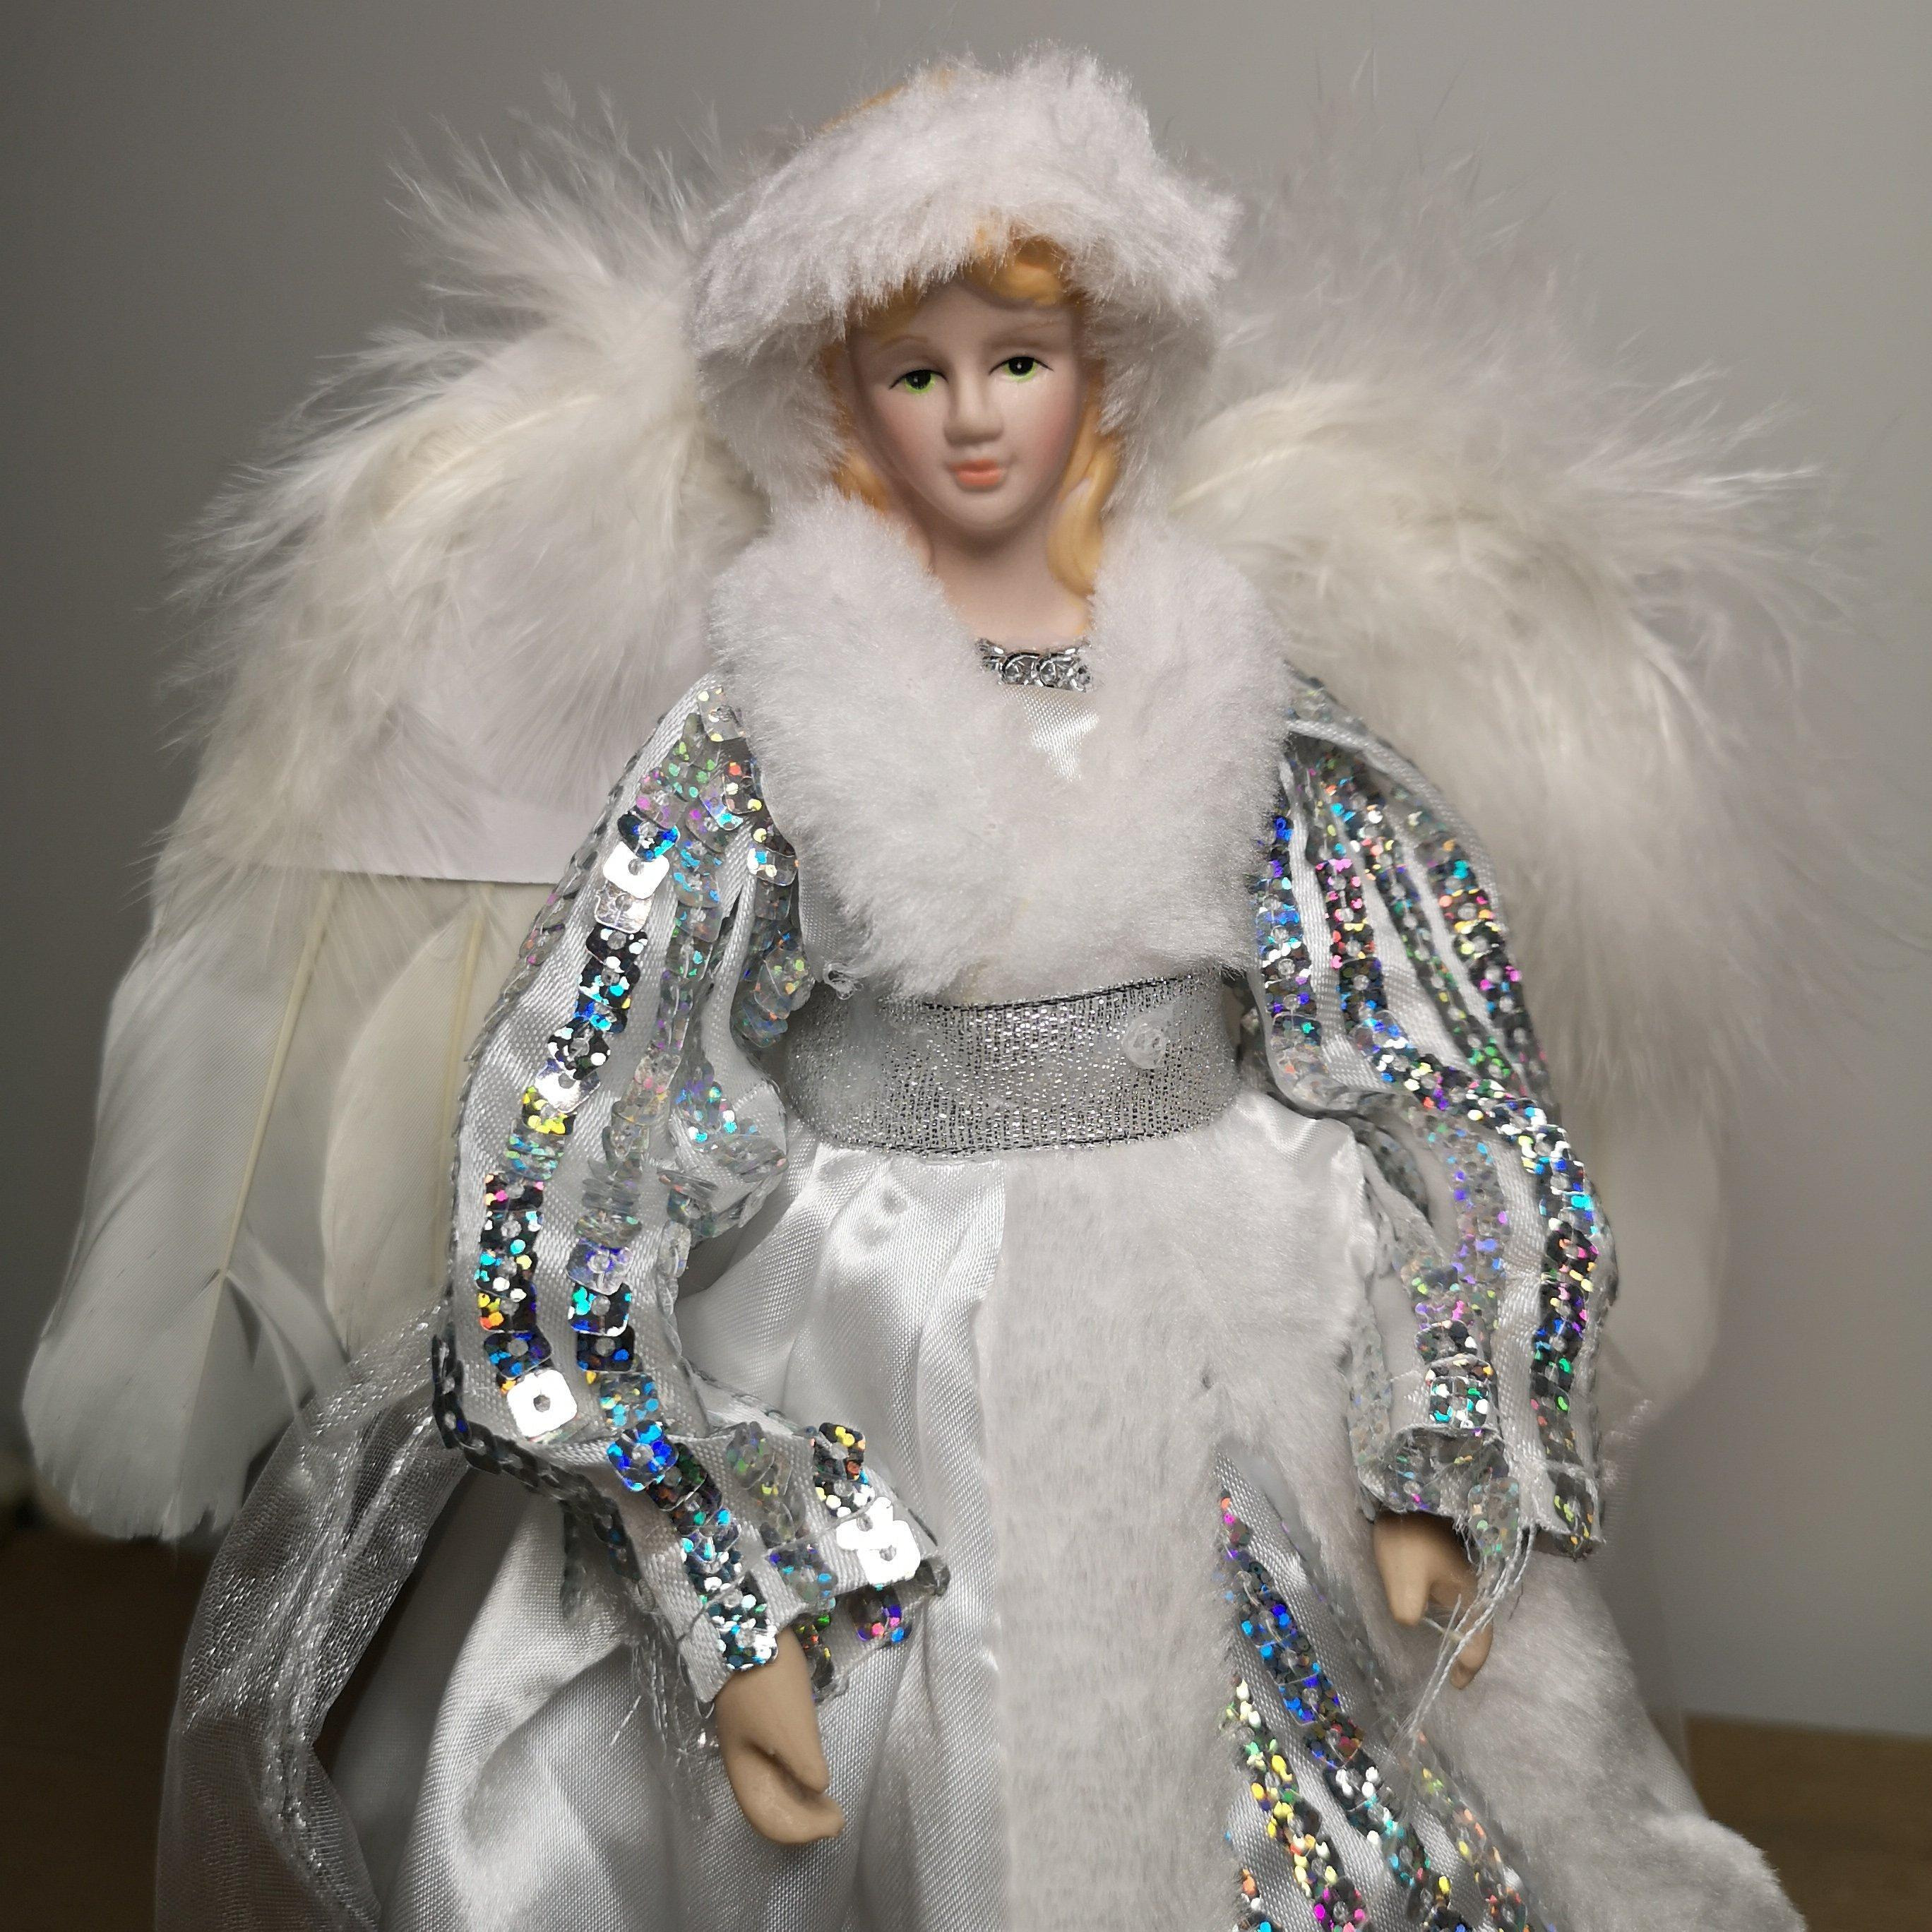 30cm Premier Christmas Tree Topper Angel Decoration in White & Silver - image 1